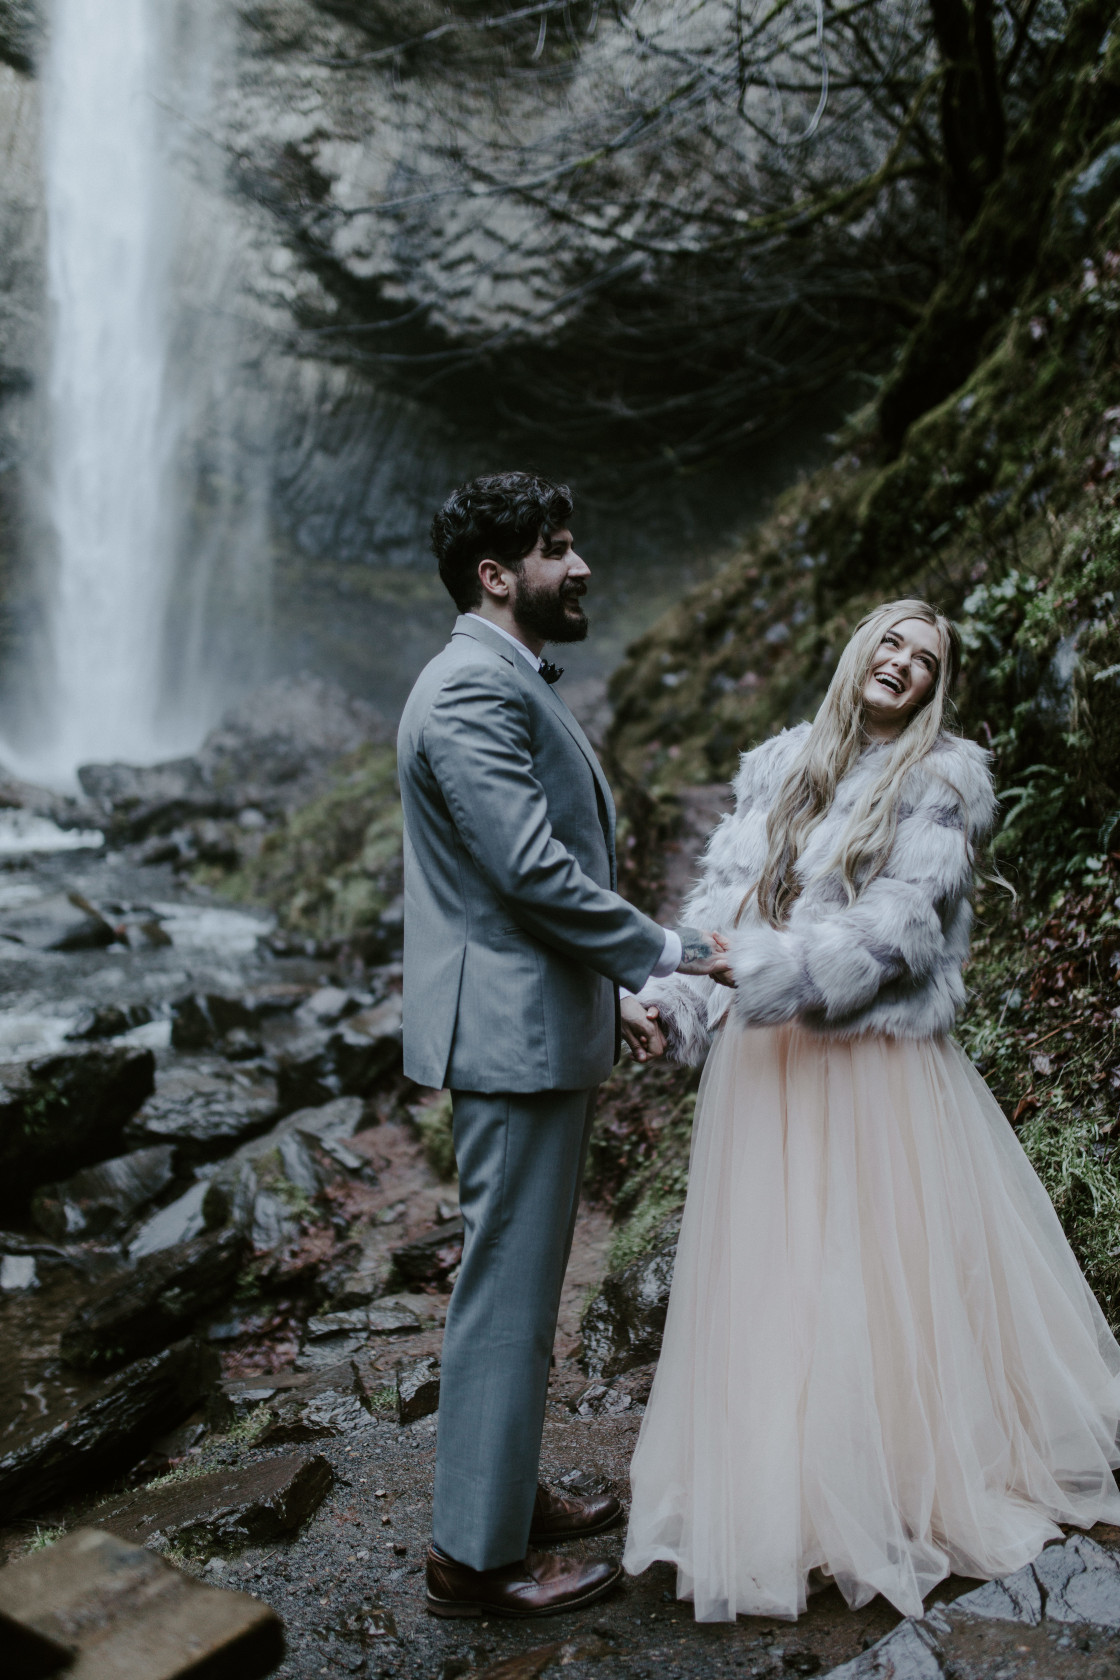 Boris and Tyanna laugh during their elopement ceremony. Adventure elopement in the Columbia River Gorge by Sienna Plus Josh.